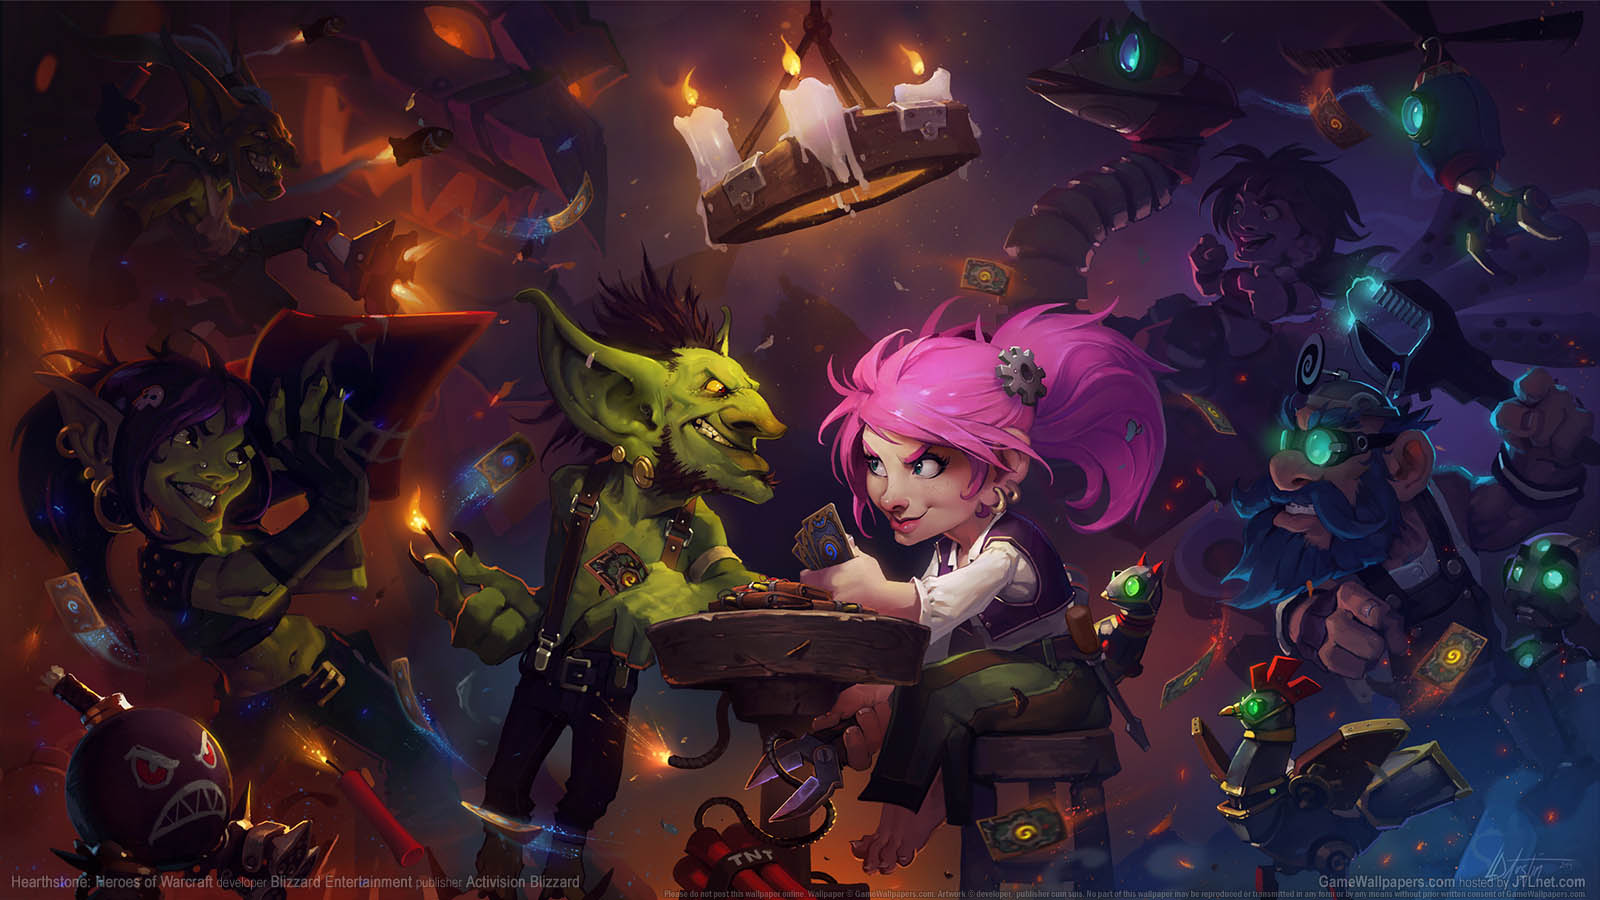 Hearthstone: Heroes of Warcraft achtergrond 10 1600x900